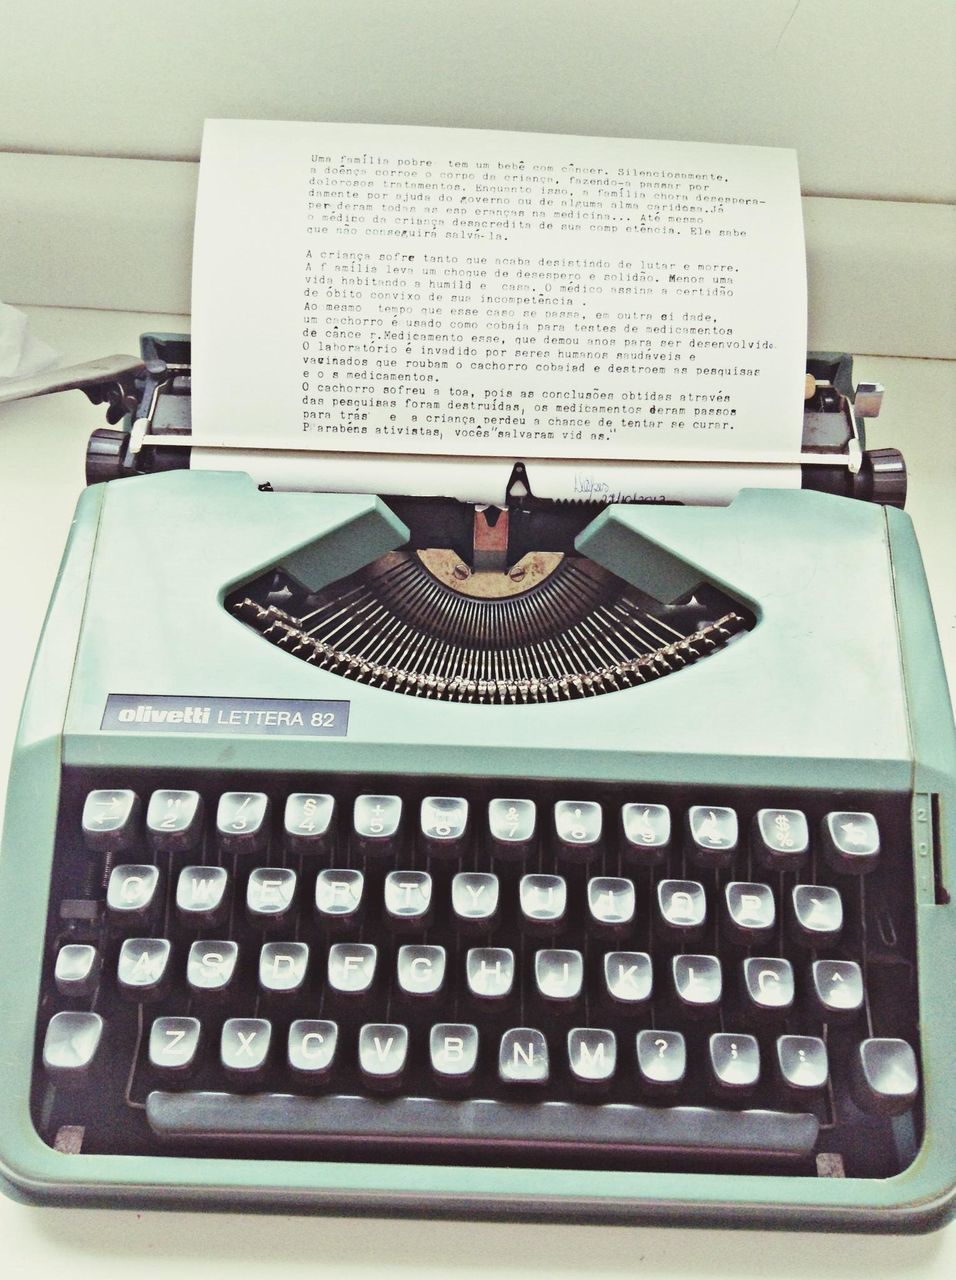 indoors, technology, communication, wireless technology, text, computer keyboard, laptop, number, connection, computer, close-up, retro styled, high angle view, old-fashioned, music, book, western script, desk, telephone, table